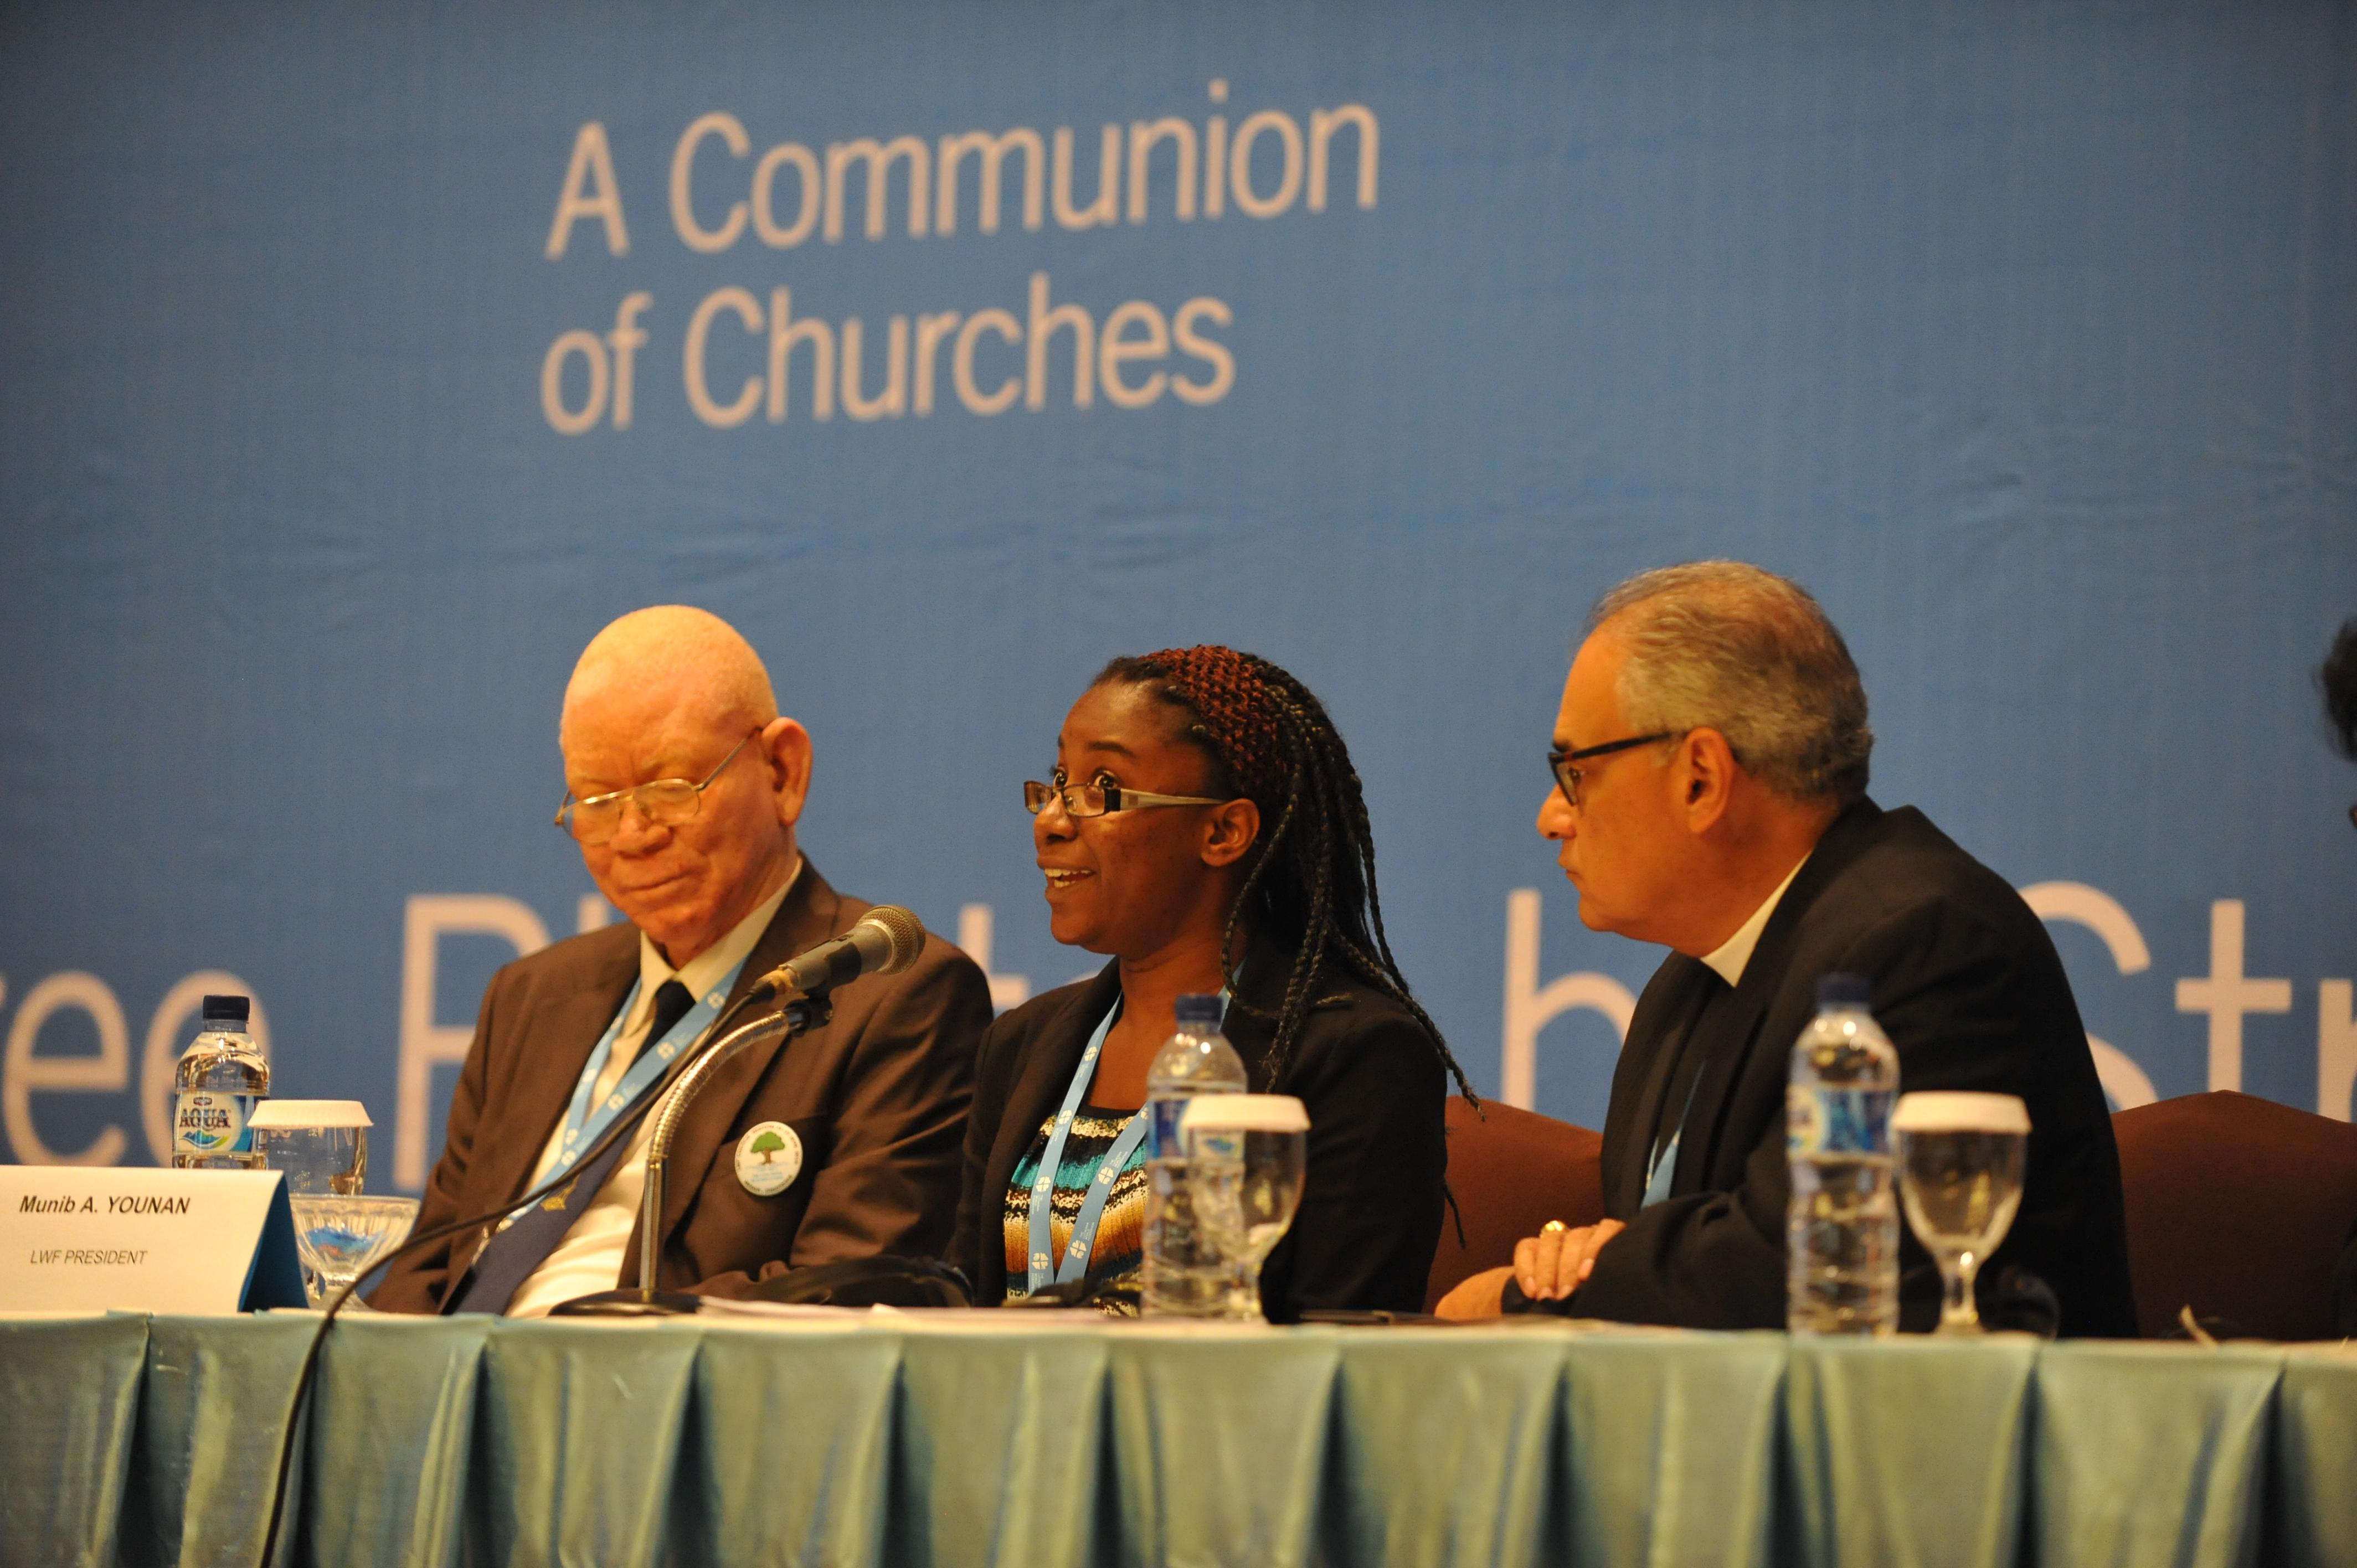 Danielle Dokman, Evangelical Lutheran Church in Suriname, speaks during the session on youth participation and intergenerational sharing at the 2014 LWF Council meeting. Photo: LWF/M. Renaux